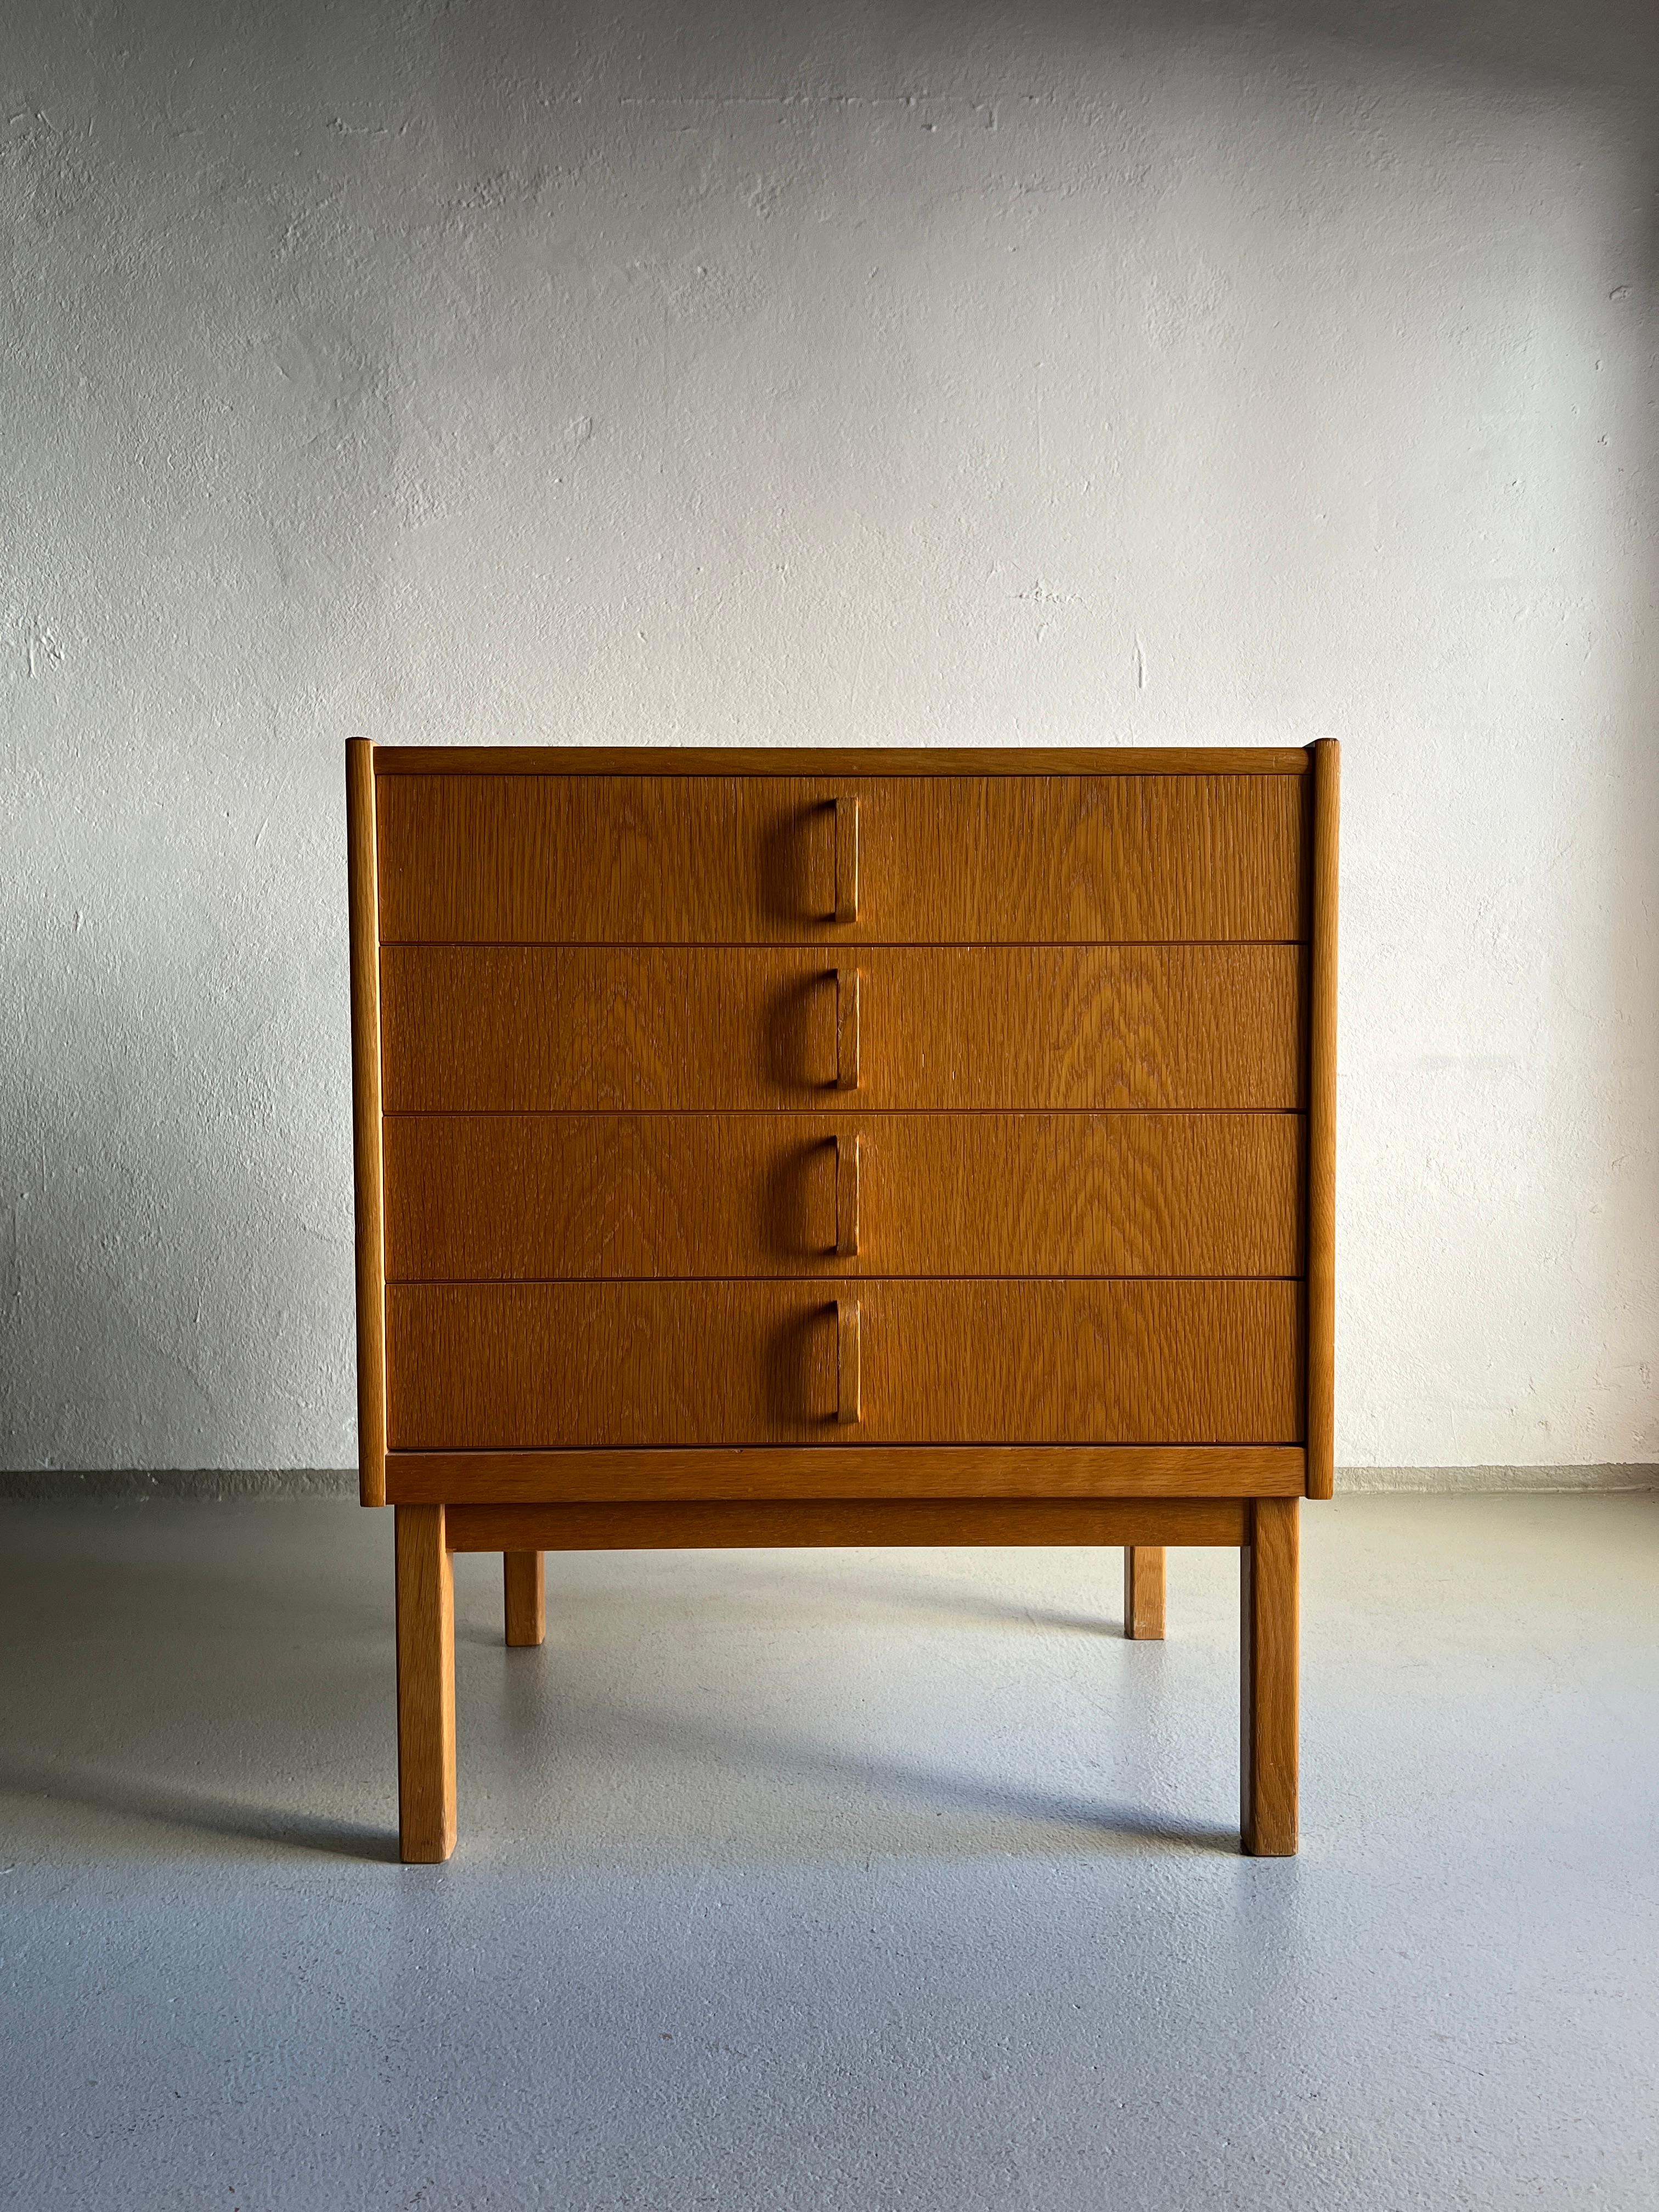 Vintage veneered oak chest of drawers with brass details on the sides and solid oak base. Each drawer features green laminated bottom.

Additional information:
Country of manufacture: Sweden
Design period: 1960s
Dimensions: 62 W x 45 D x 72 H